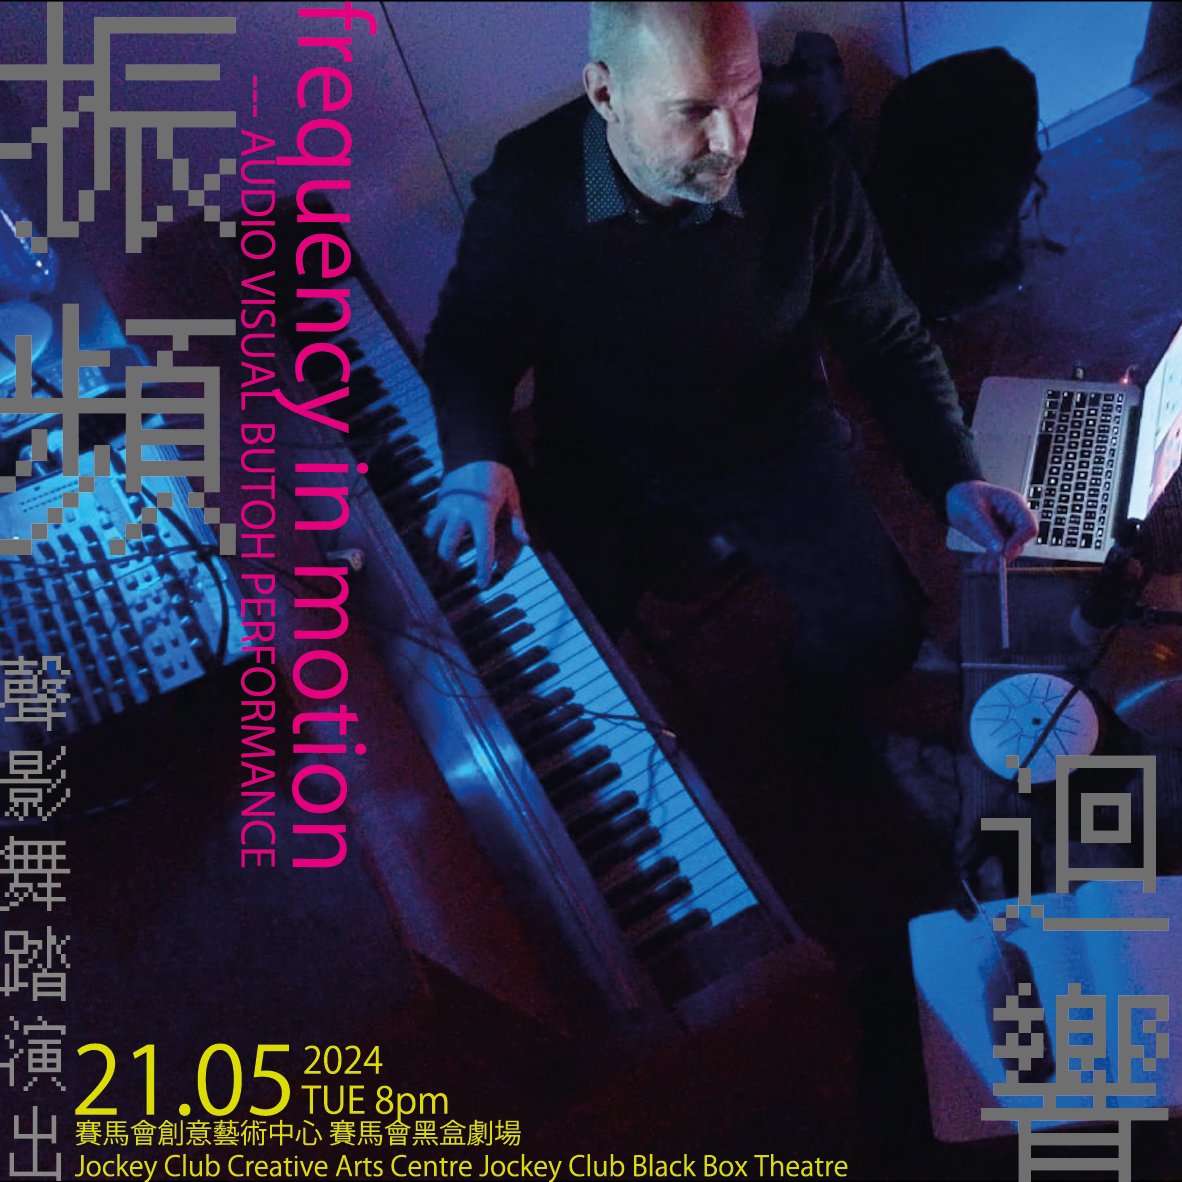 Next Audiovisual Butoh performance 'Frequency in Motion' w @chrishlynn1 is in Hong Kong, 21 May 2024 at JCCAC! Performers: Ioku Ero Nikaido (HK), Kiwi Chan (HK) & guest dancer (JP). jccac.org.hk/?a=group&id=c_… #butohhk #performance #audiovisual #performingarthk #dancenewshk